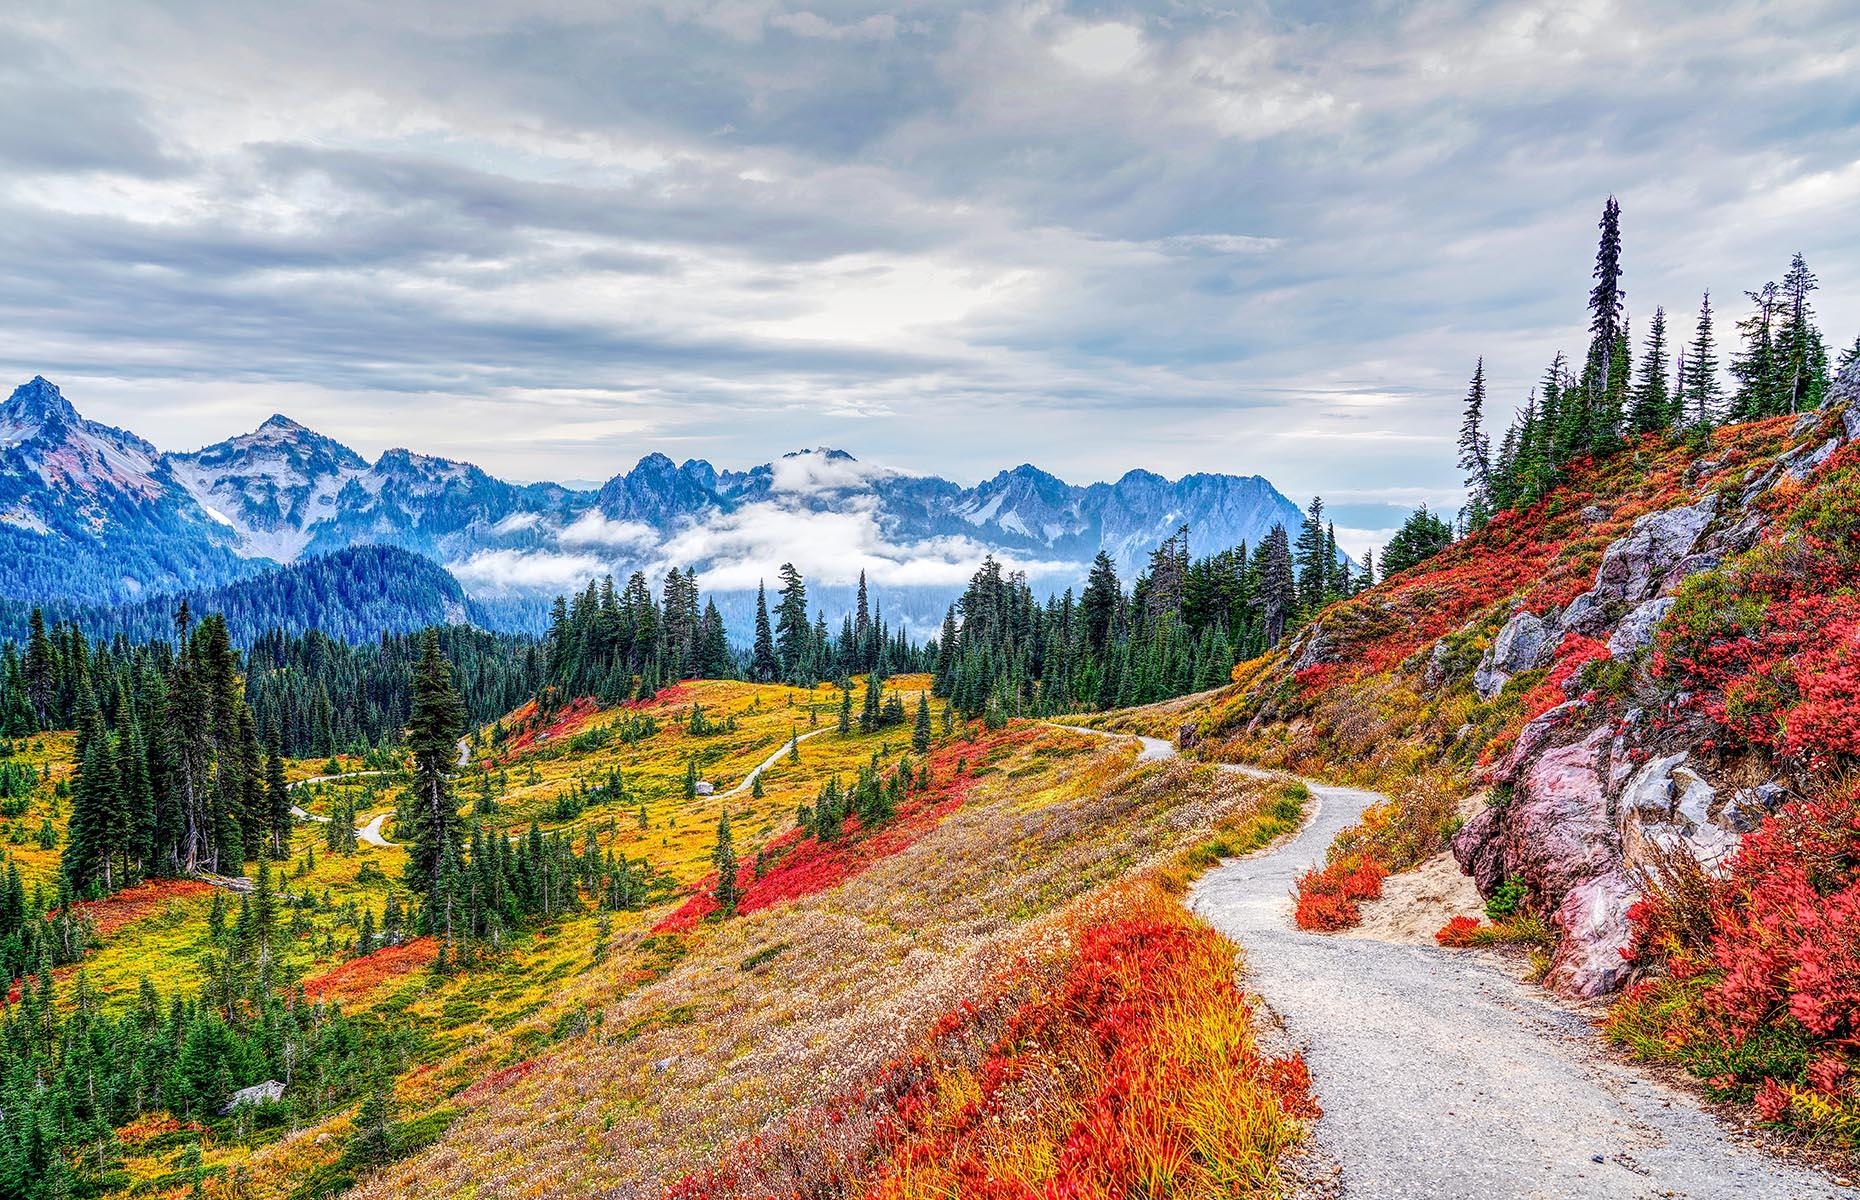 <p>Just a short drive from the city, <a href="https://www.nps.gov/mora/index.htm">Mount Rainier National Park</a> offers over 14,000-square-feet (1,300sqm) of adventure. Powerful waterfalls and gorgeous wildflower meadows make for a picture-perfect landscape, and with over 130 trails to choose from there's plenty of exploring to be done. Depending on the time of year you're here, you can do everything from skiing and snowmobiling to mountain biking and fishing. Some facilities remain closed, so check before visiting.</p>  <p><strong>Now take a look at <a href="https://www.loveexploring.com/galleries/90563/americas-most-stunning-natural-wonders?page=1">America's most stunning natural wonders</a></strong></p>